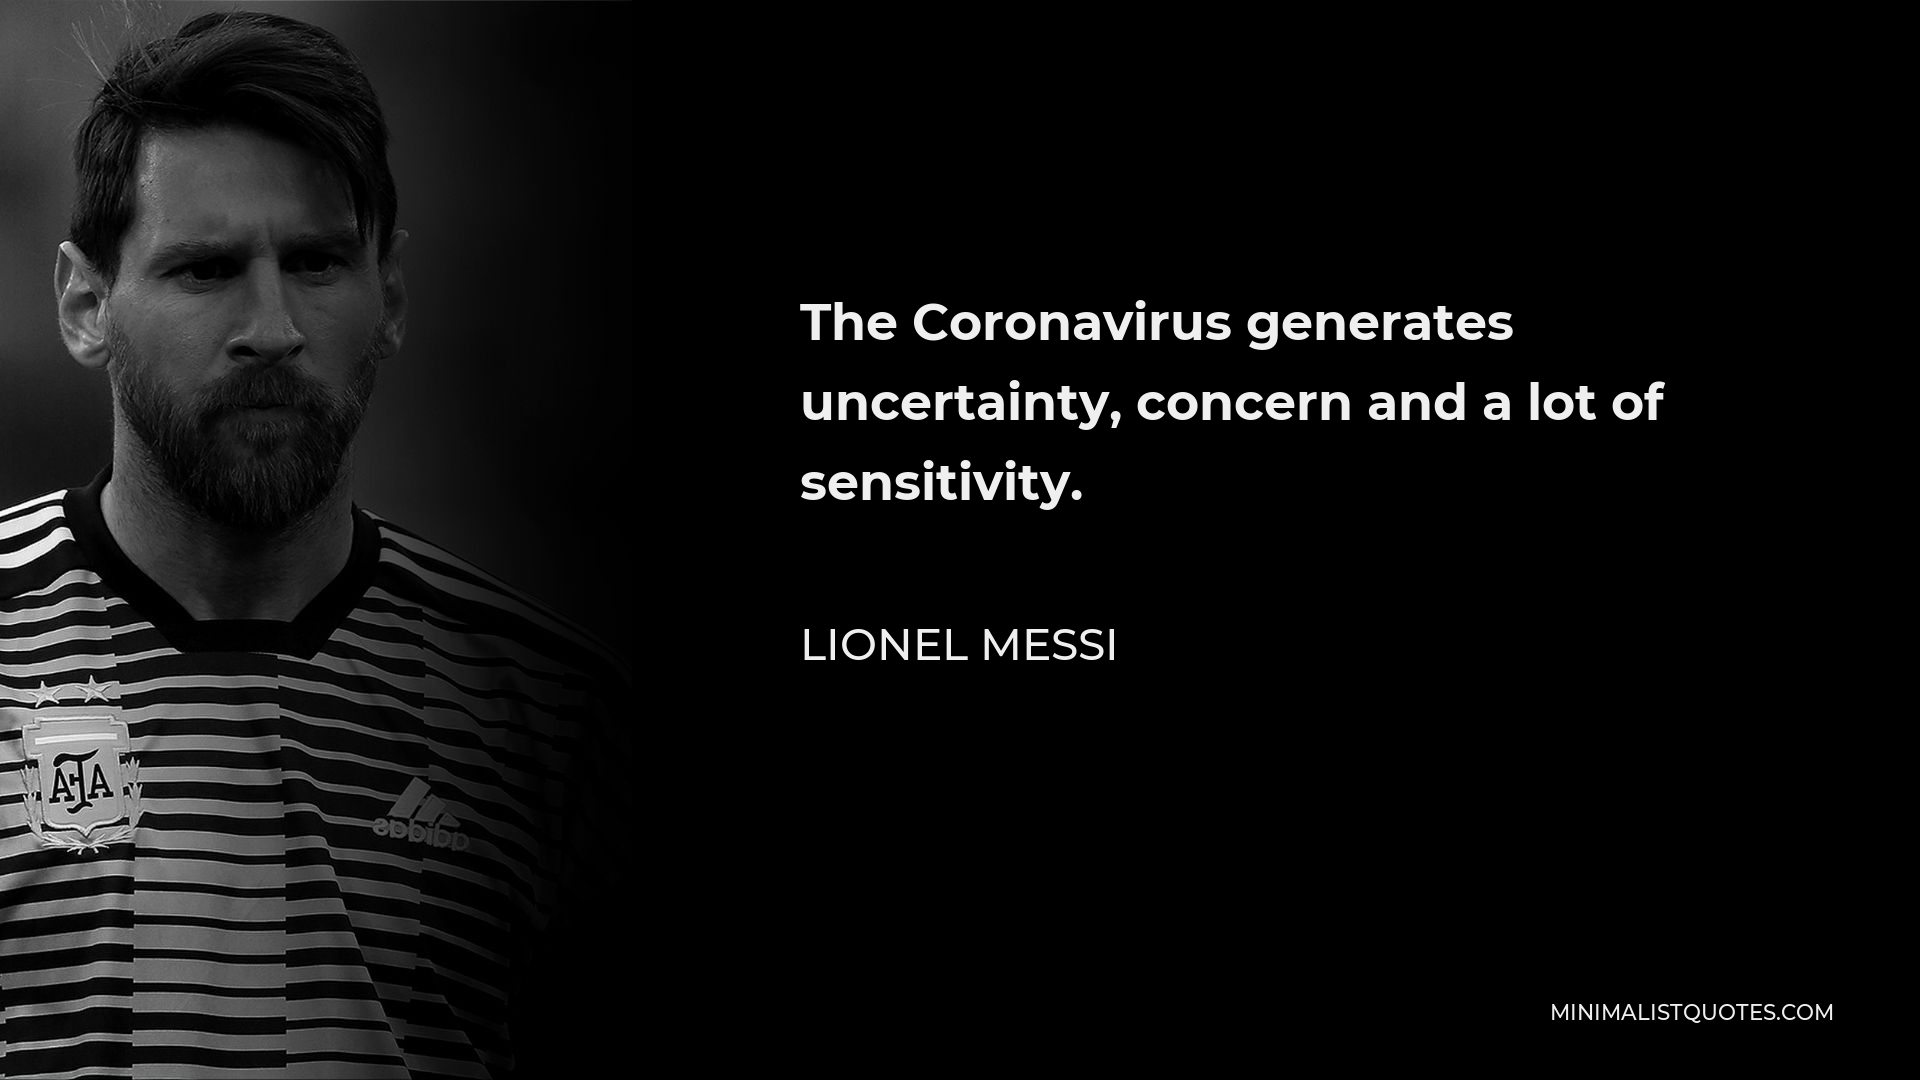 Lionel Messi Quote - The Coronavirus generates uncertainty, concern and a lot of sensitivity.